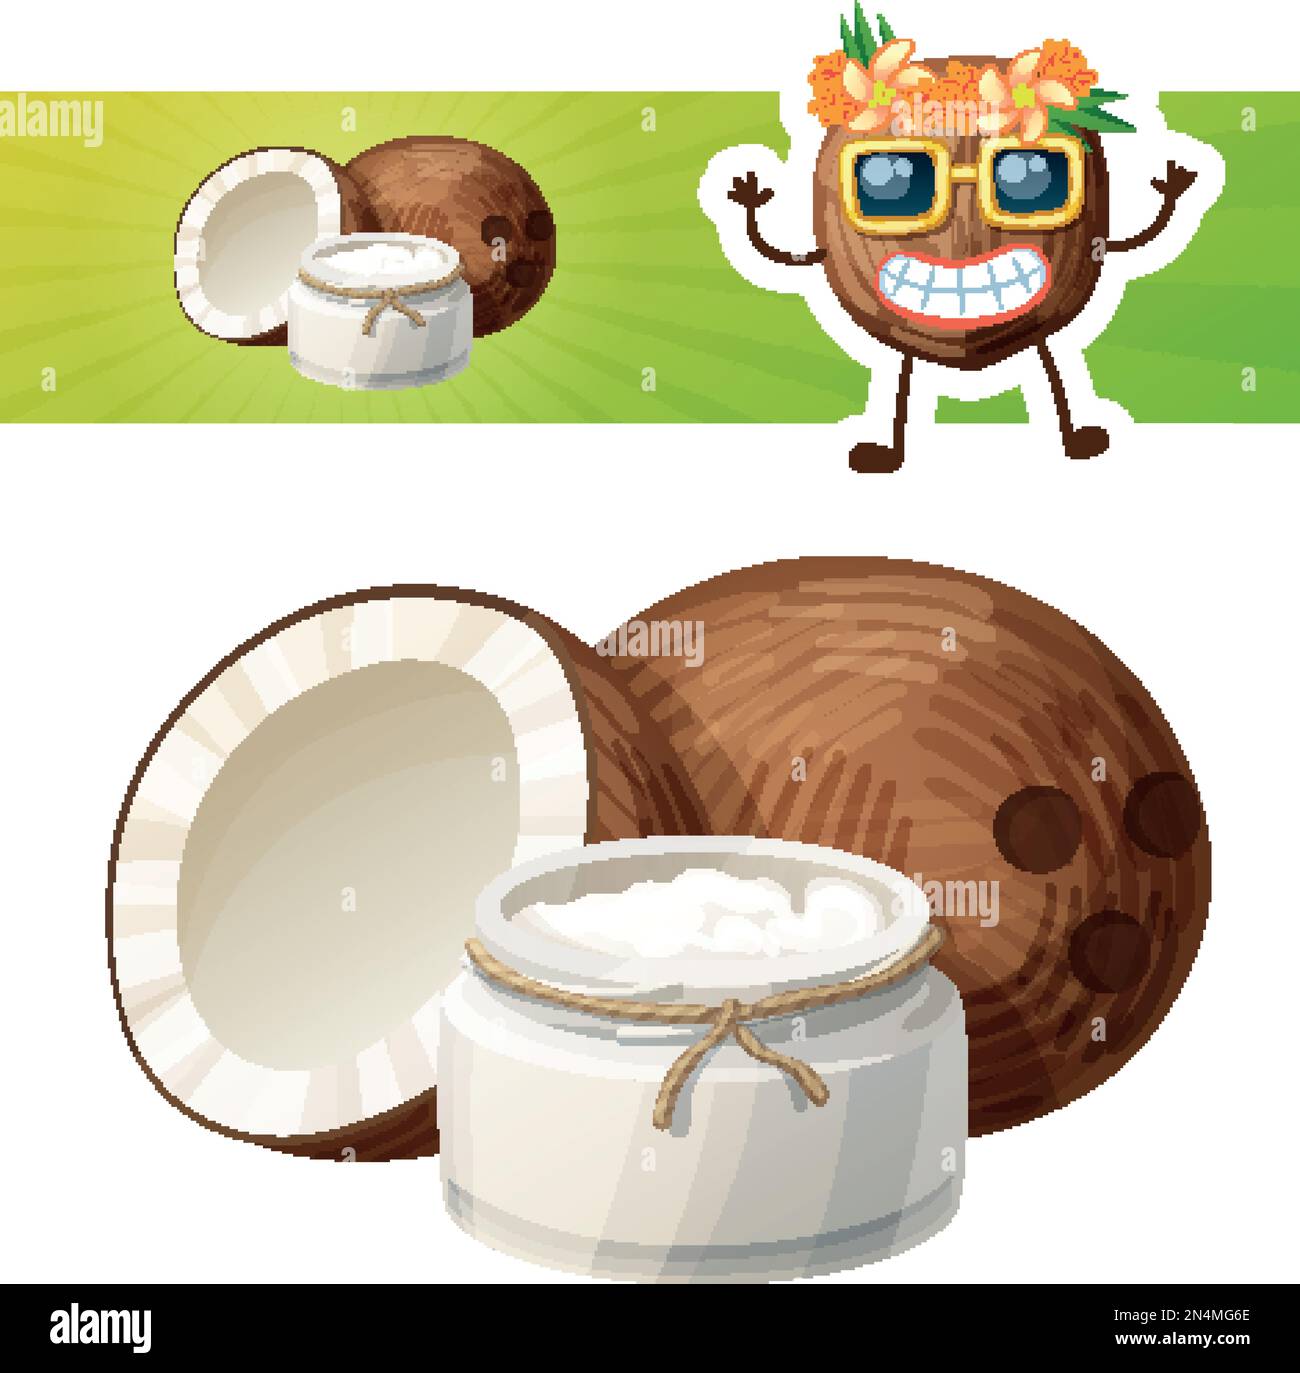 Coconut oil in a glass jar. Cartoon vector icon with a coconut character Stock Vector